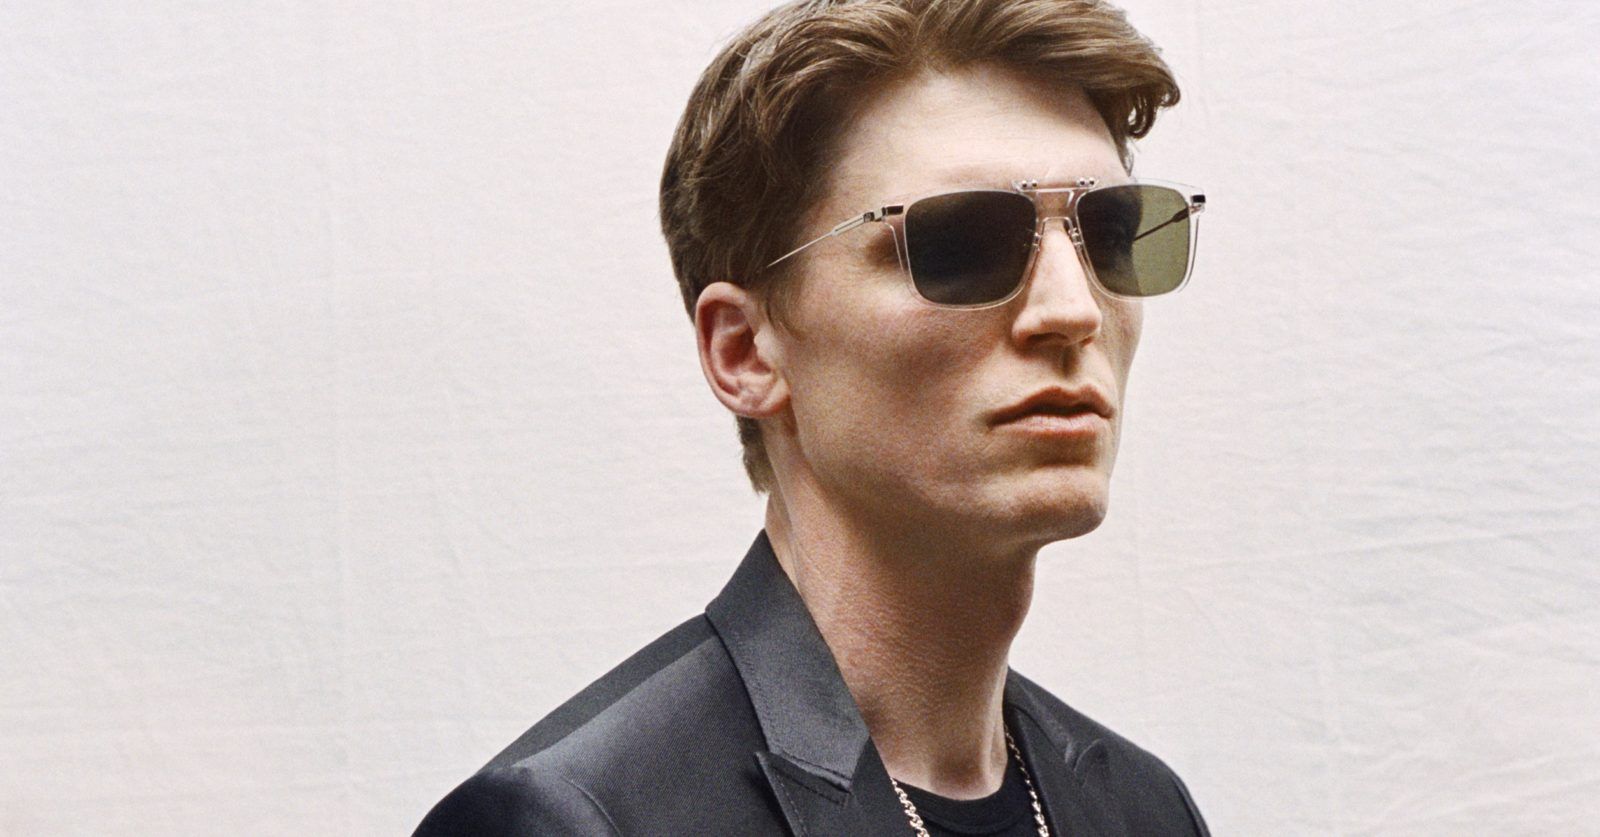 Rimowa launches its first unisex sunglasses collection